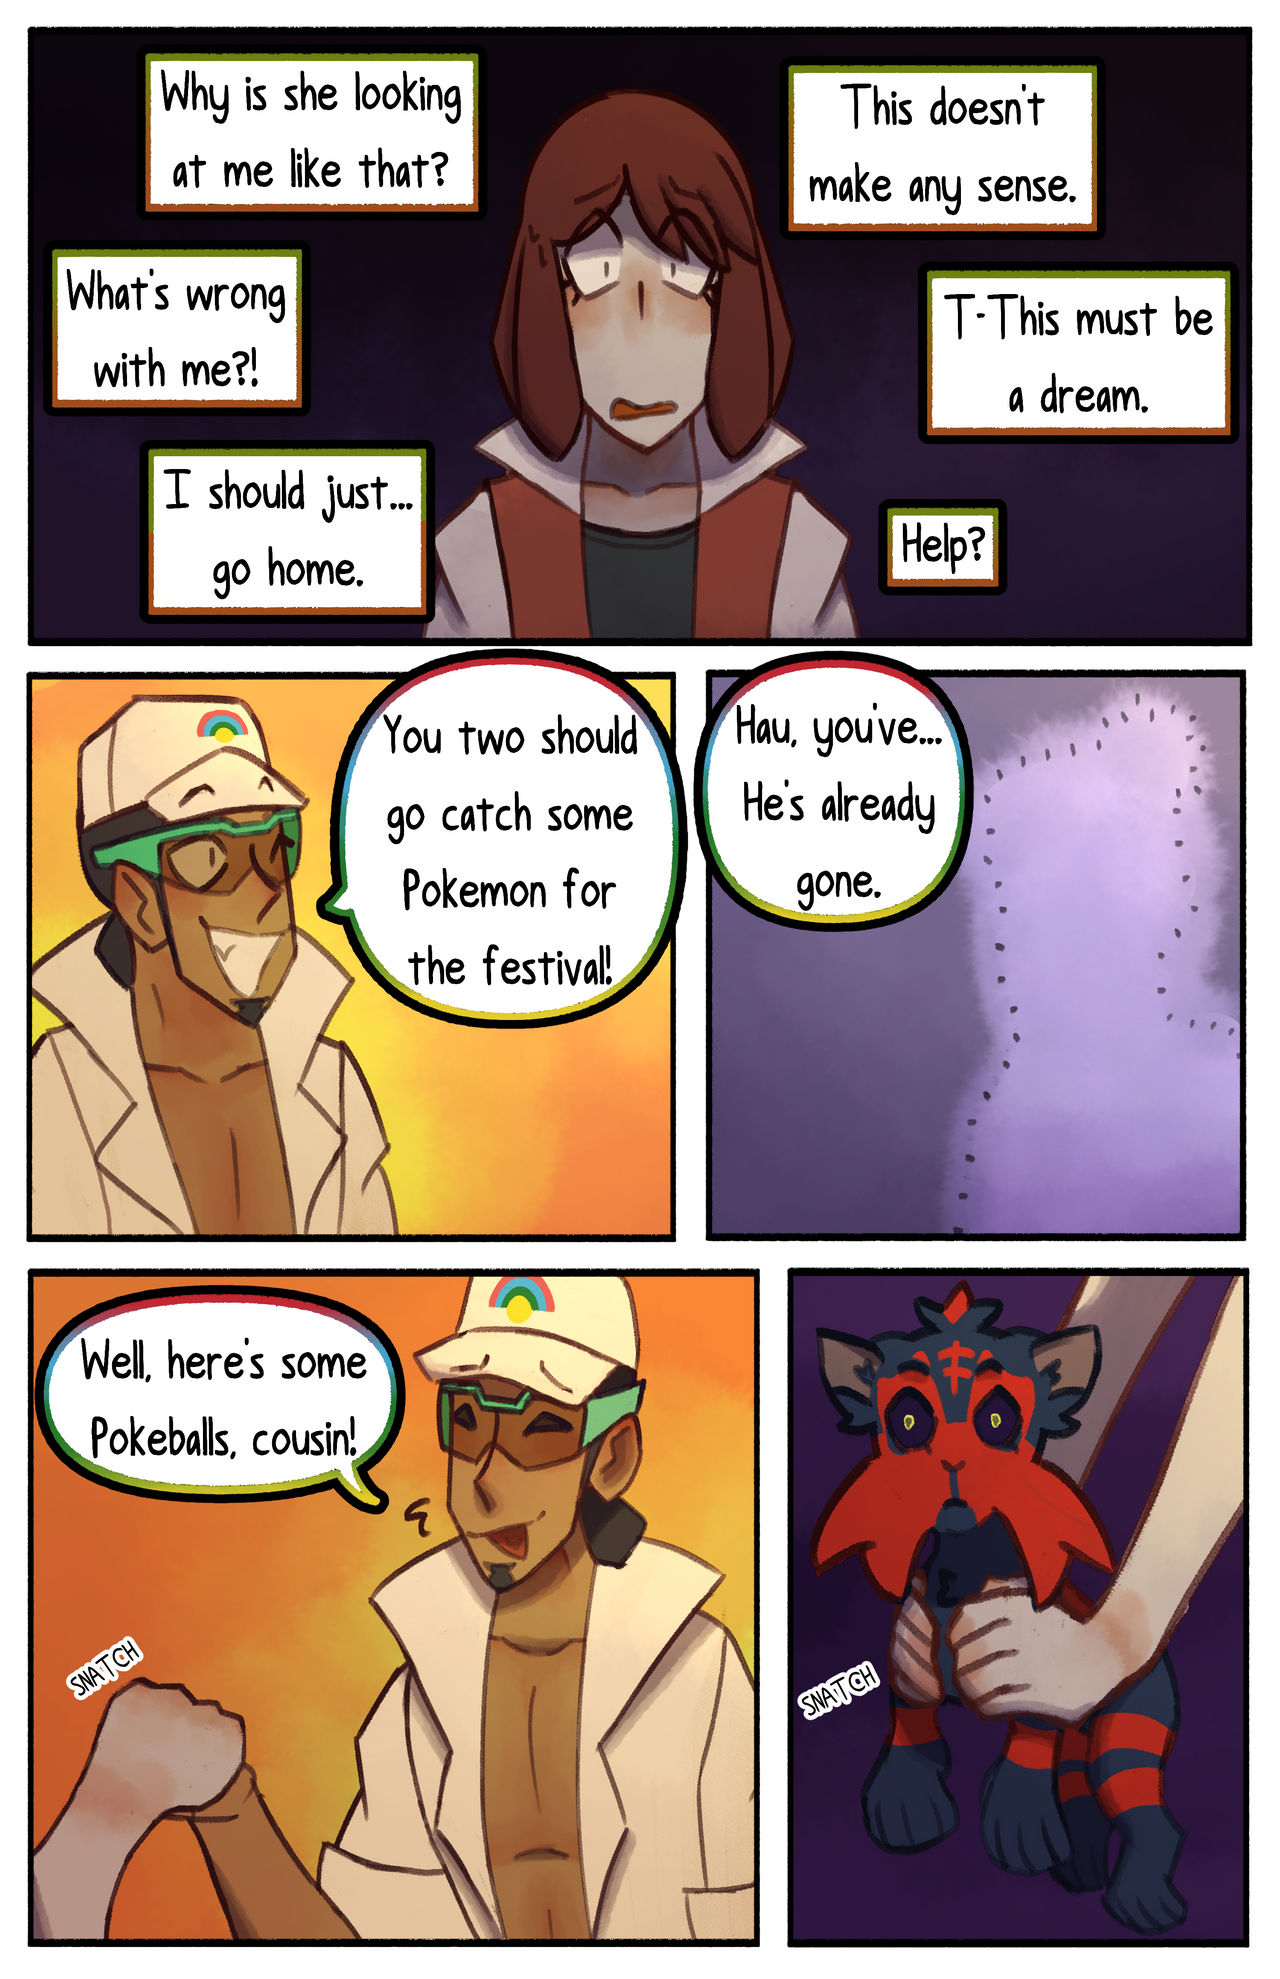 bloom__an_ultra_moon_nuzlocke___chapter_1__page_28_by_zombie_zcorge_df8vvbe-fullview.jpg